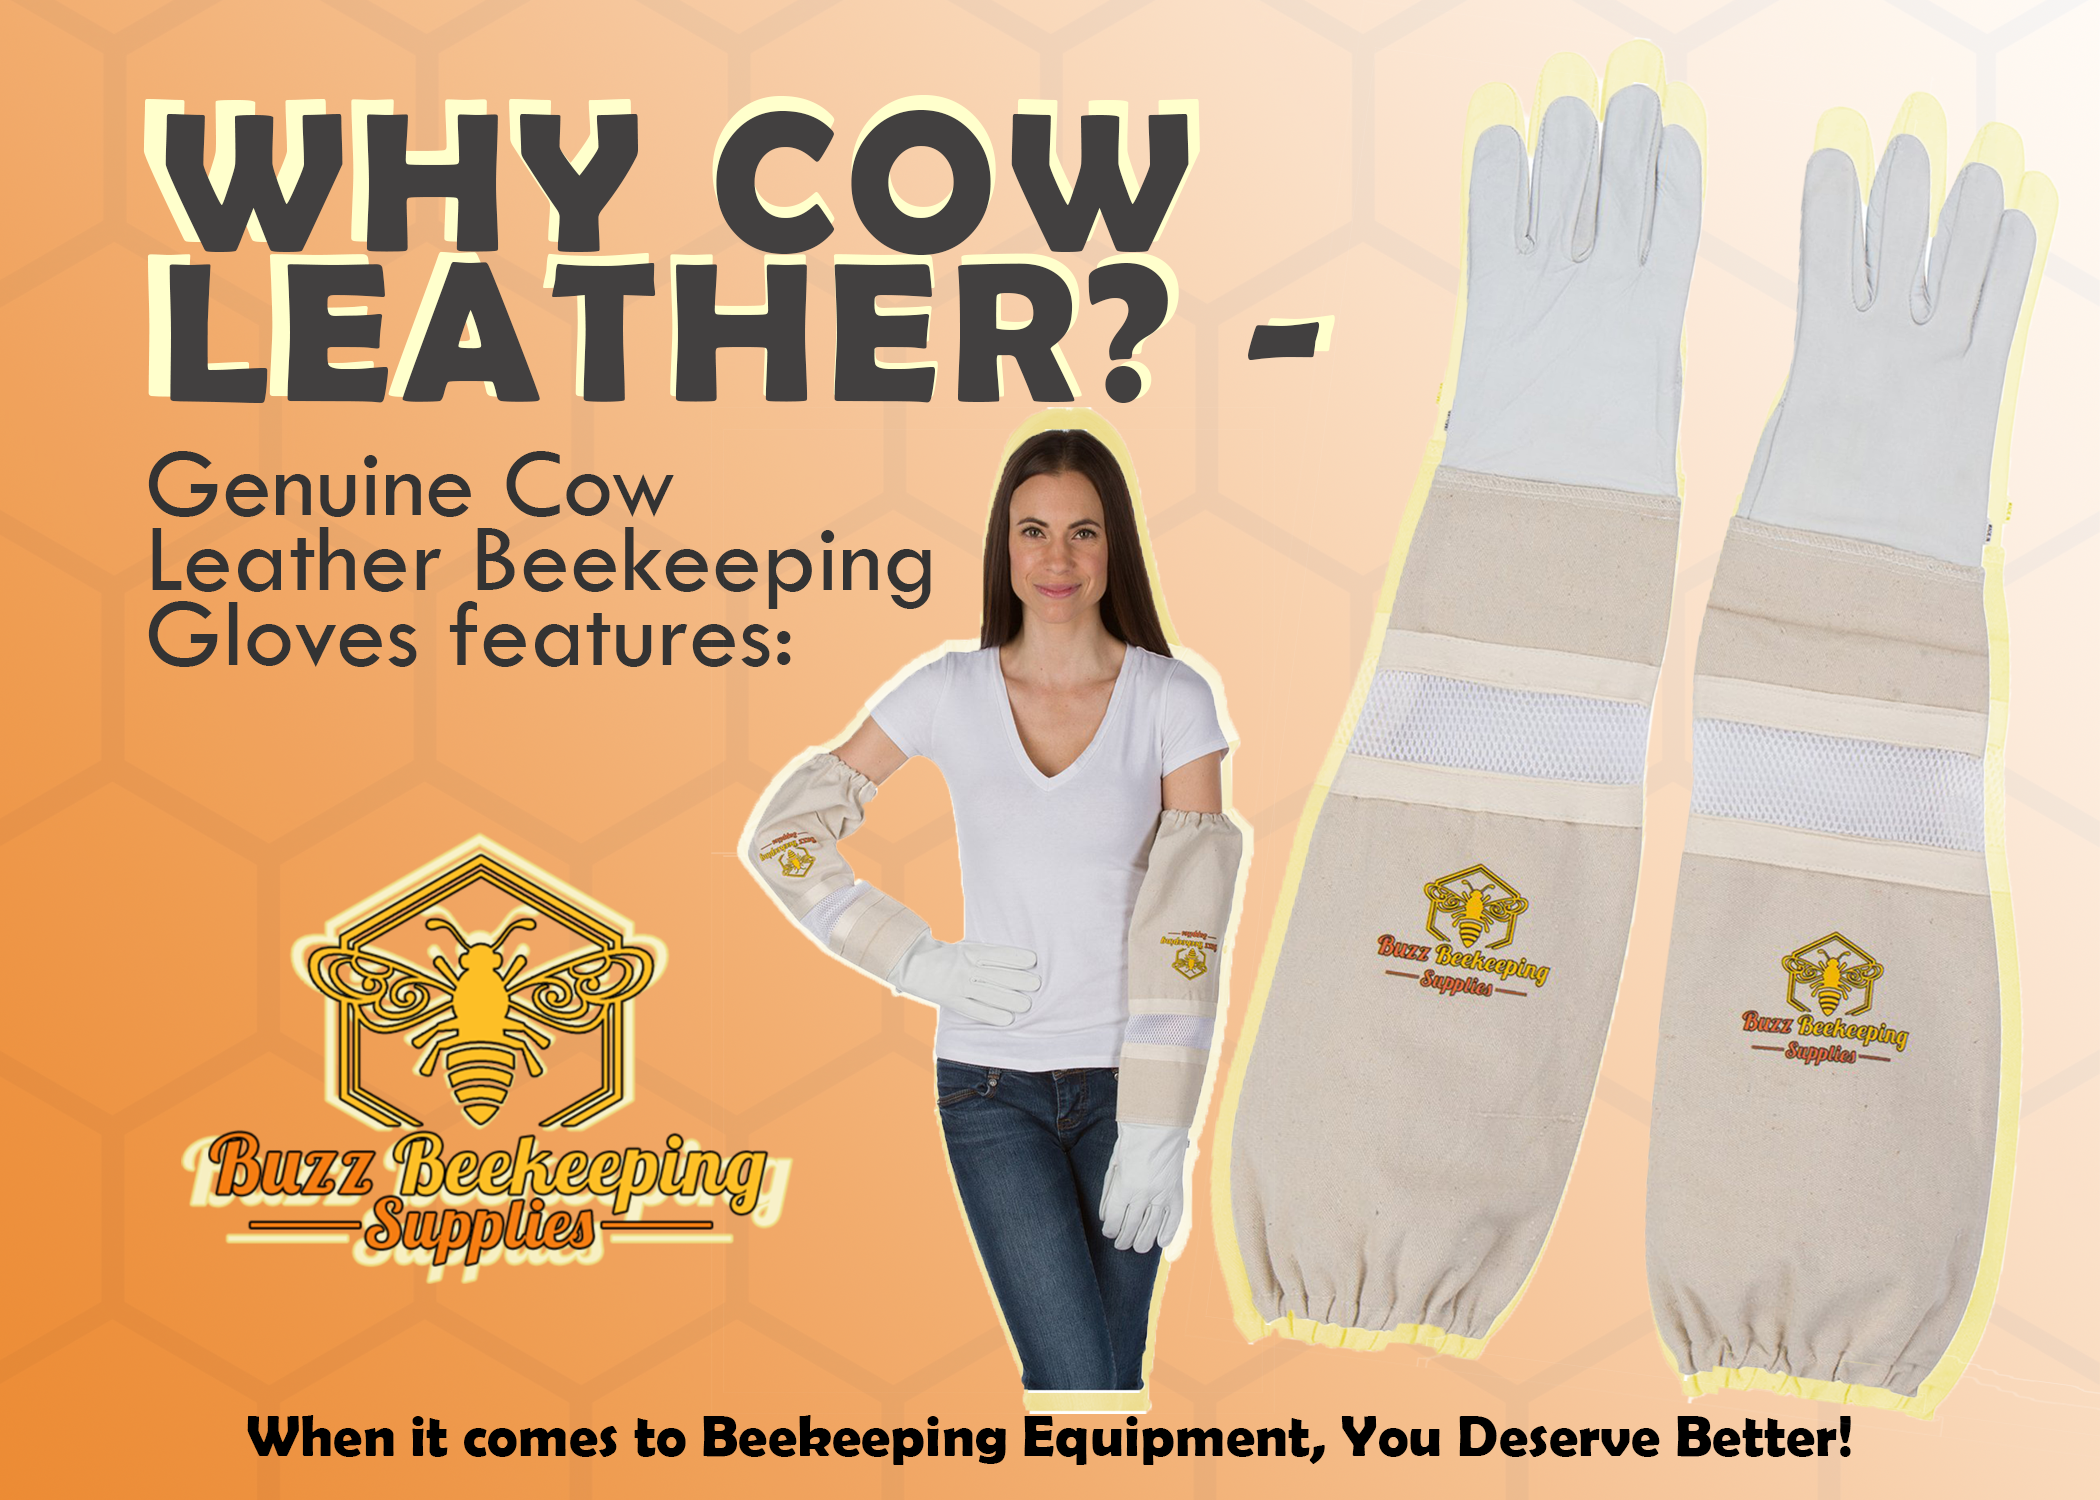 Beekeeping cow leather gloves featured image